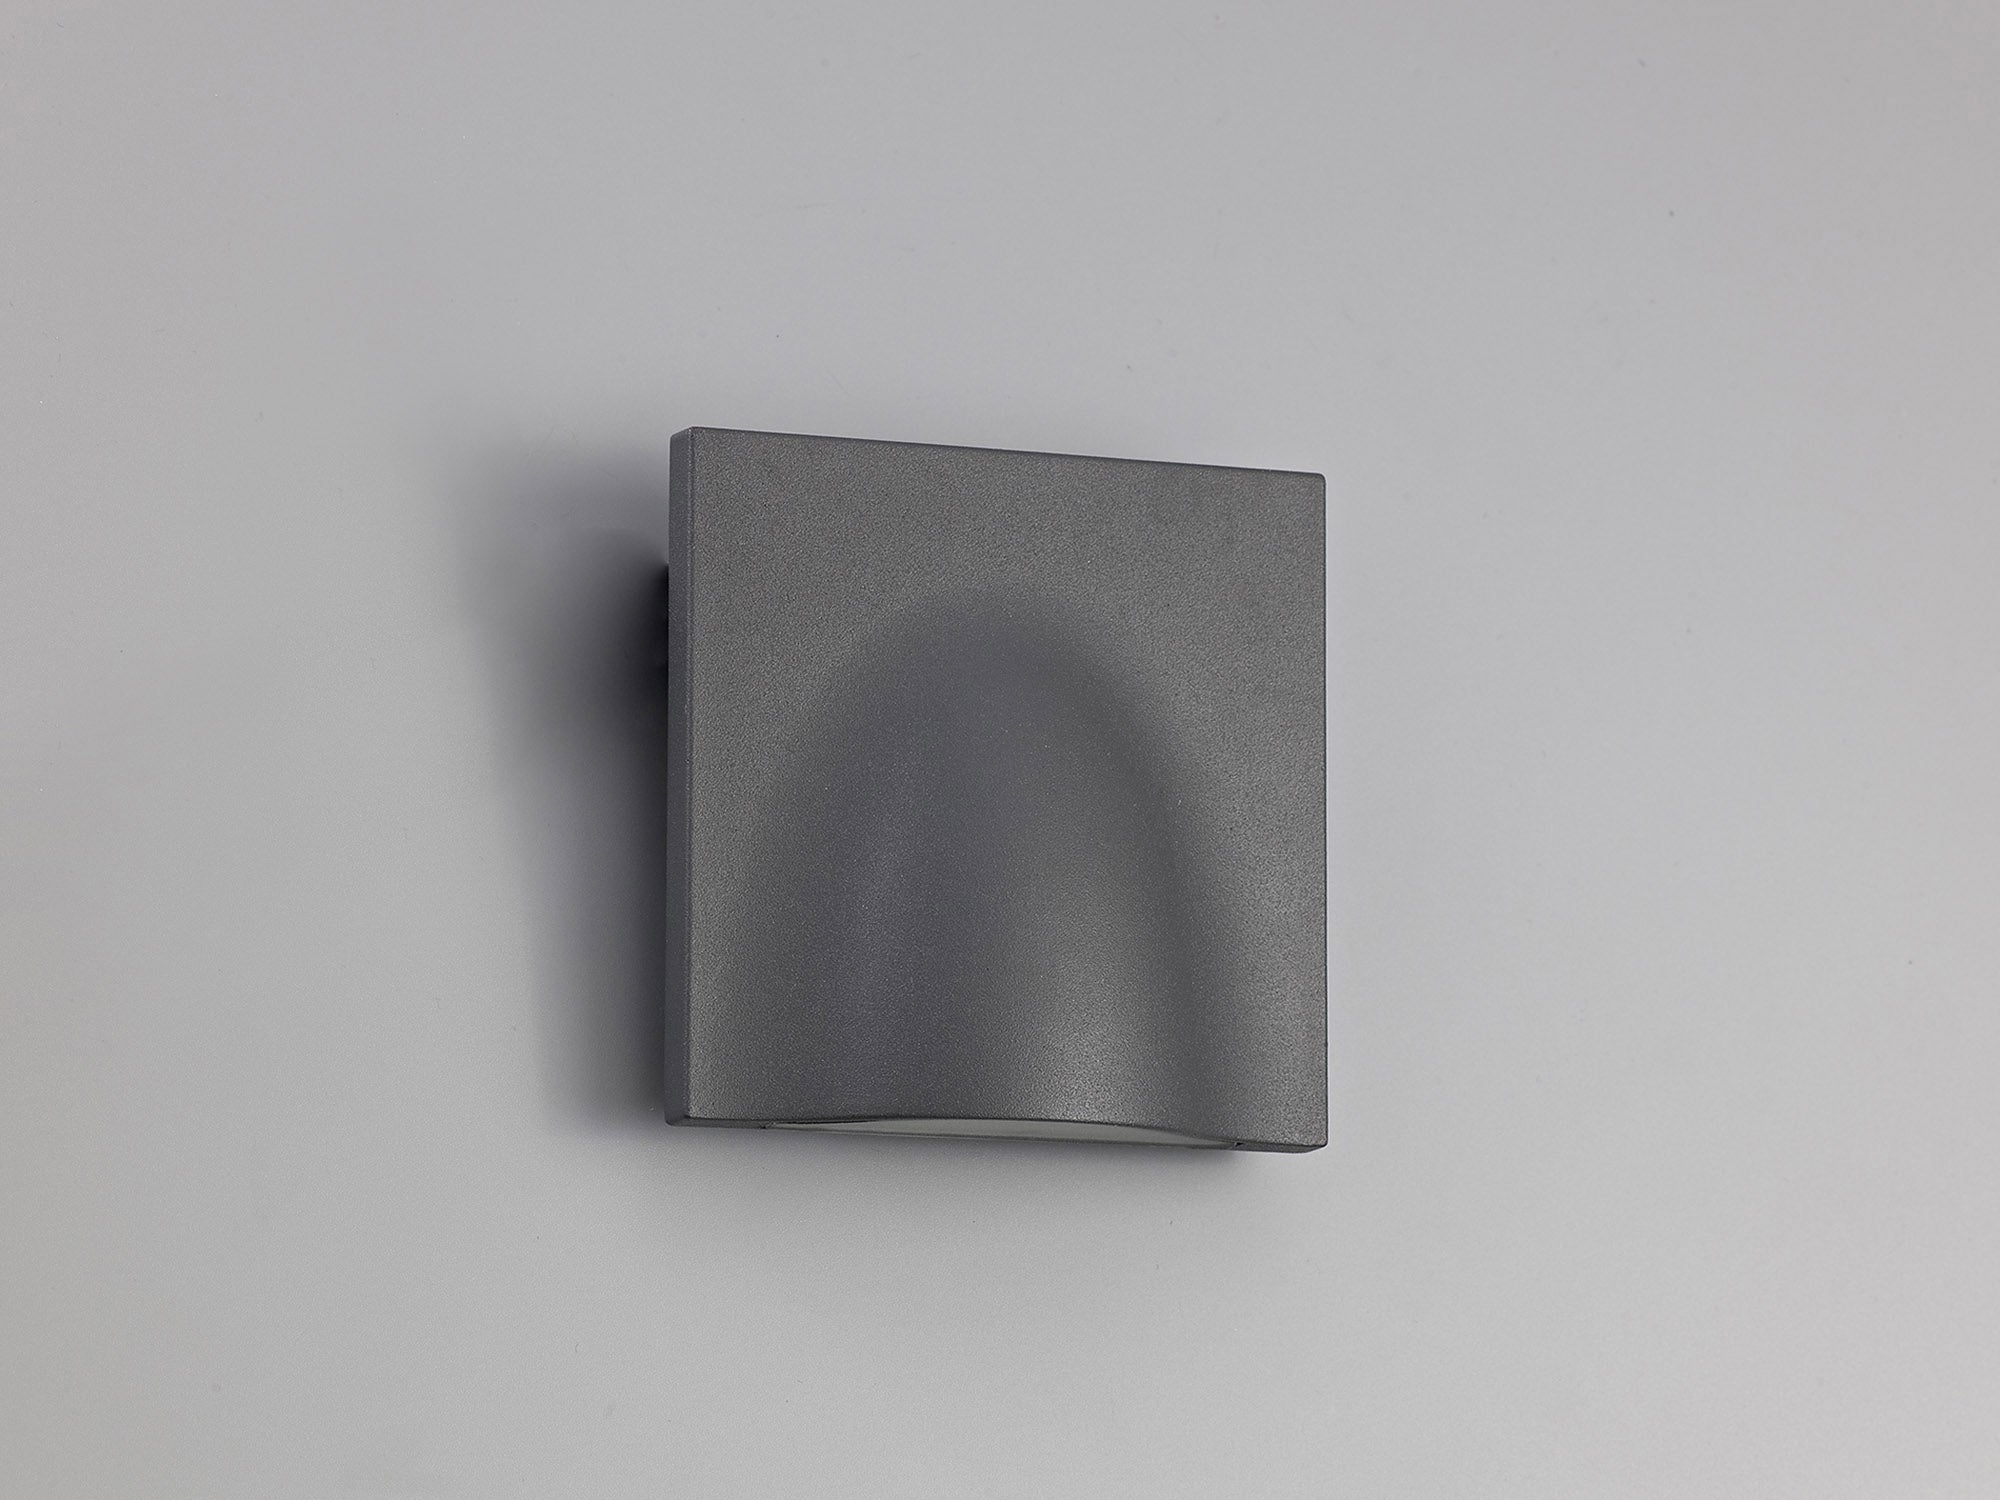 Esco Wall Lamp, 1 x 6W LED, 3000K, 510lm, IP54, Anthracite, 3yrs Warranty